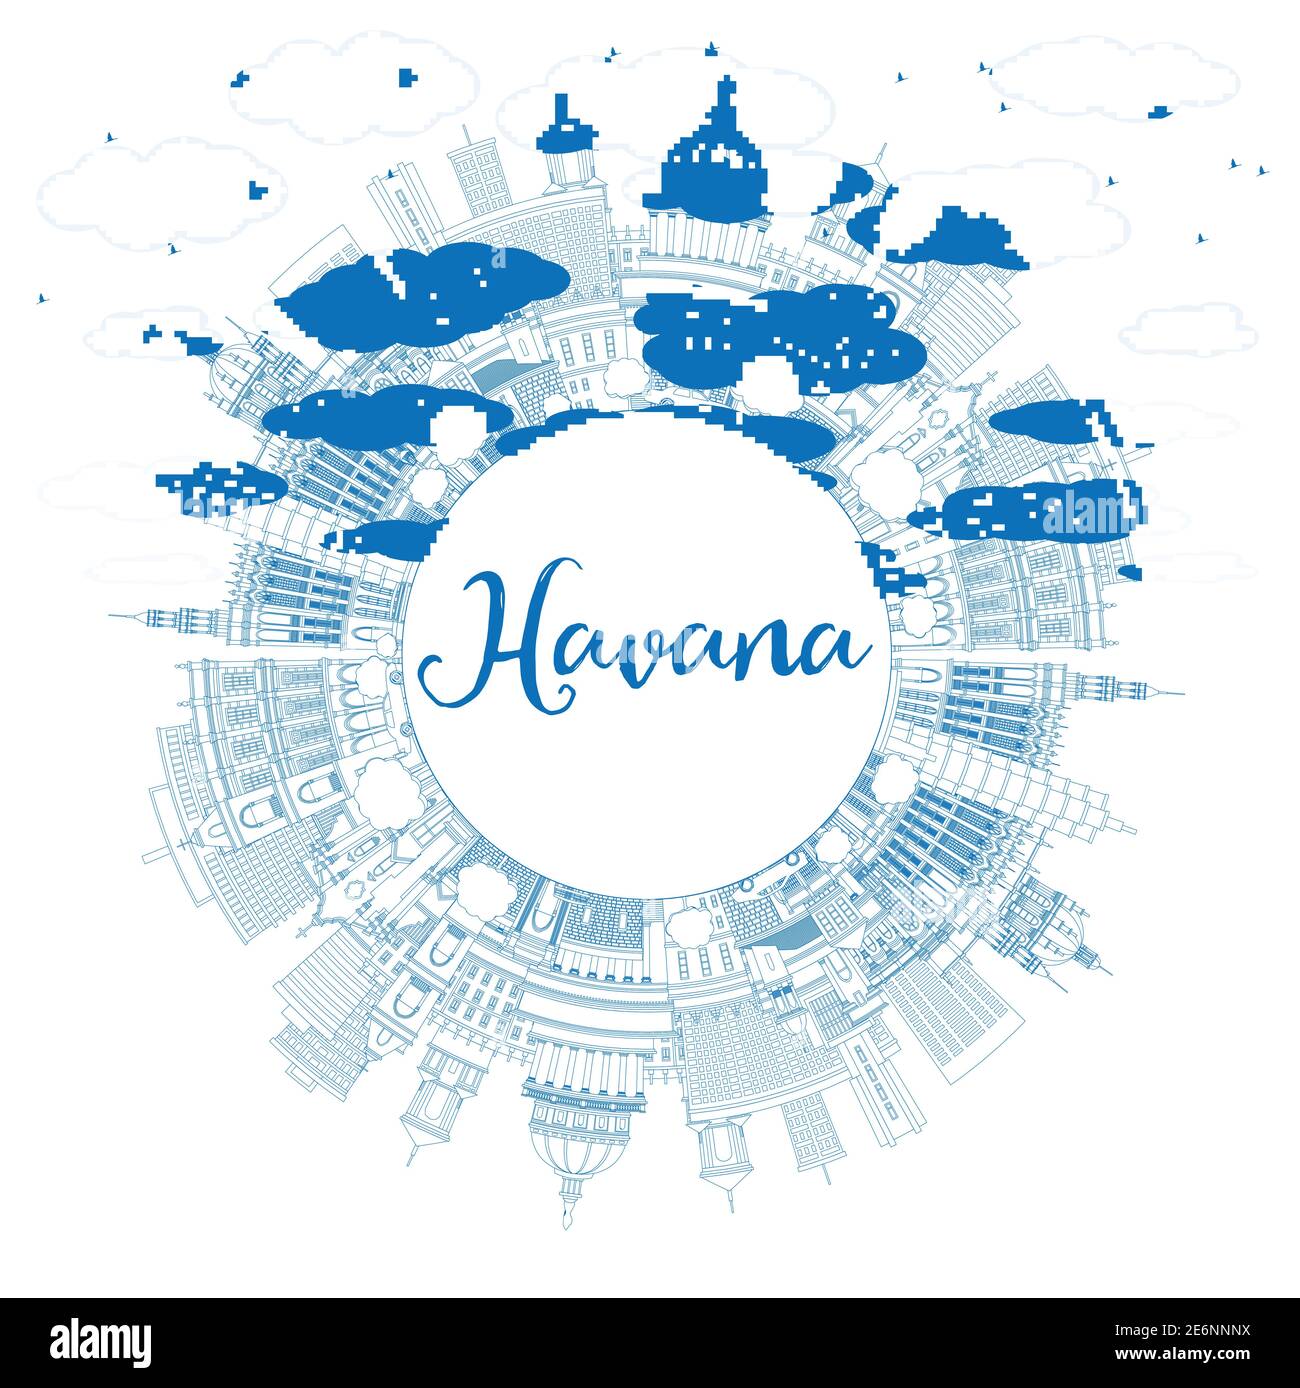 Outline Havana Cuba City Skyline with Blue Buildings and Copy Space. Vector Illustration. Tourism Concept with Historic and Modern Architecture. Stock Vector